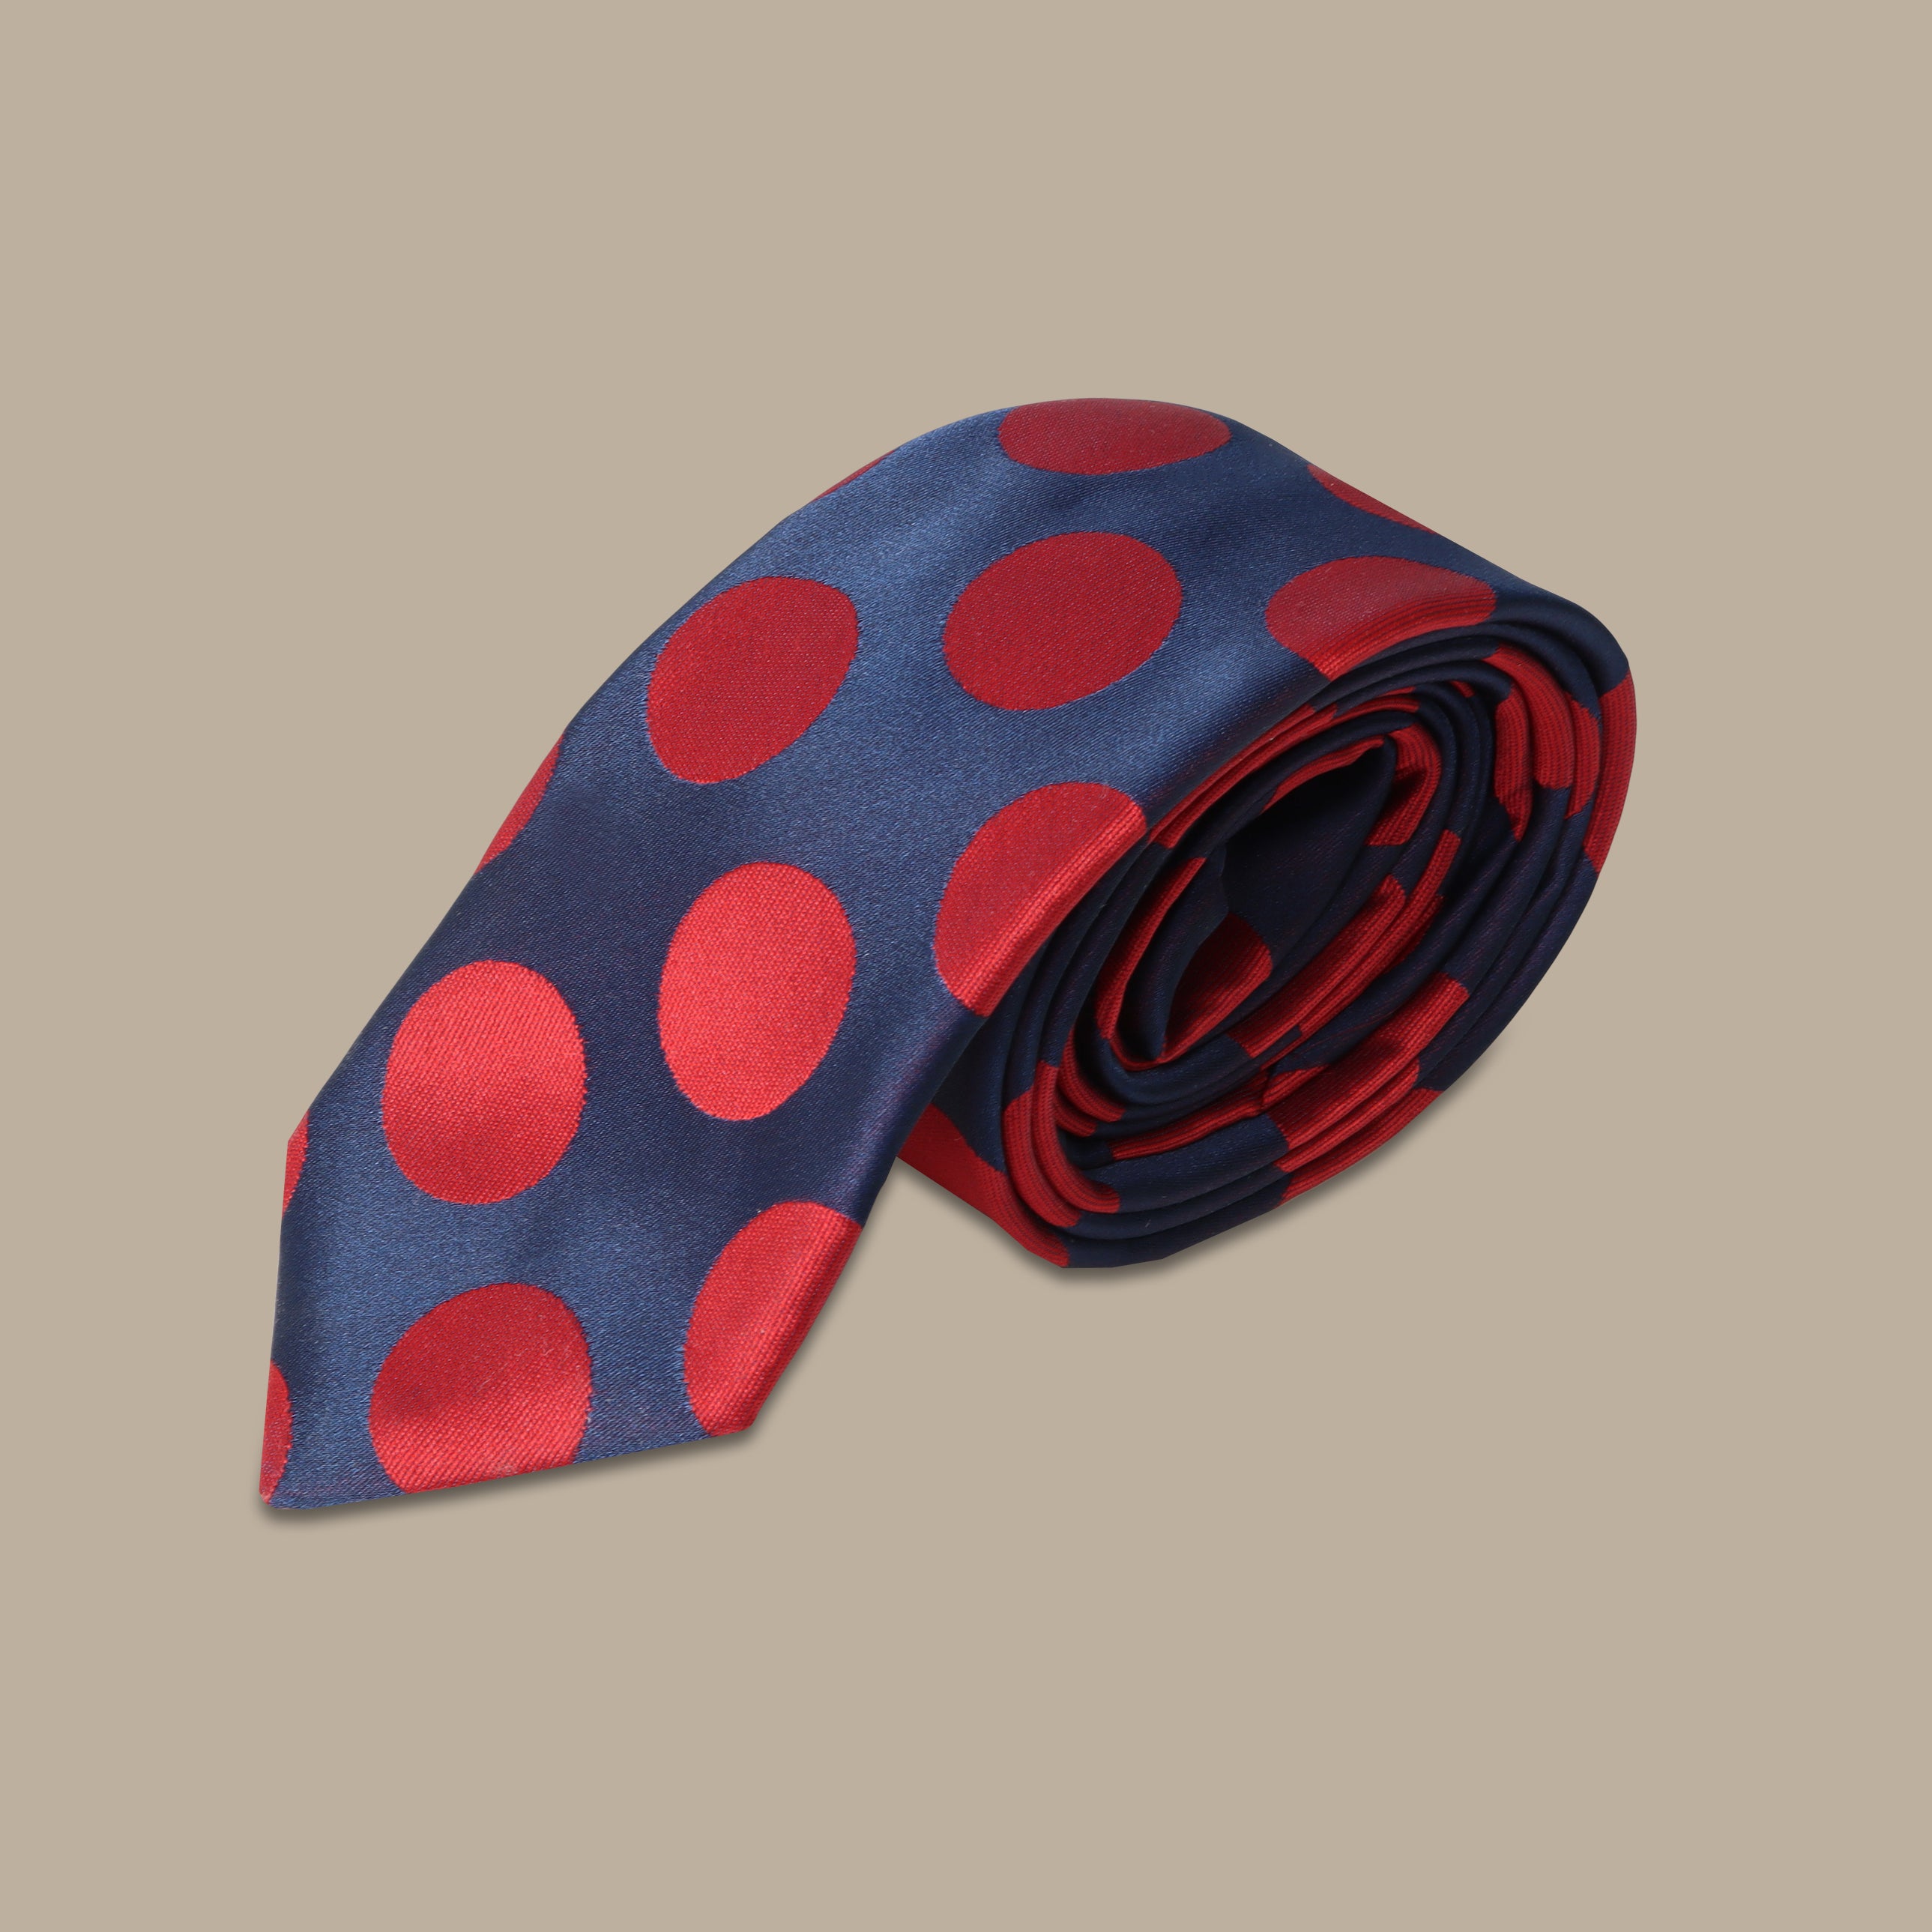 Classic Contrast: Red and Navy Blue Polka-Dotted Tie